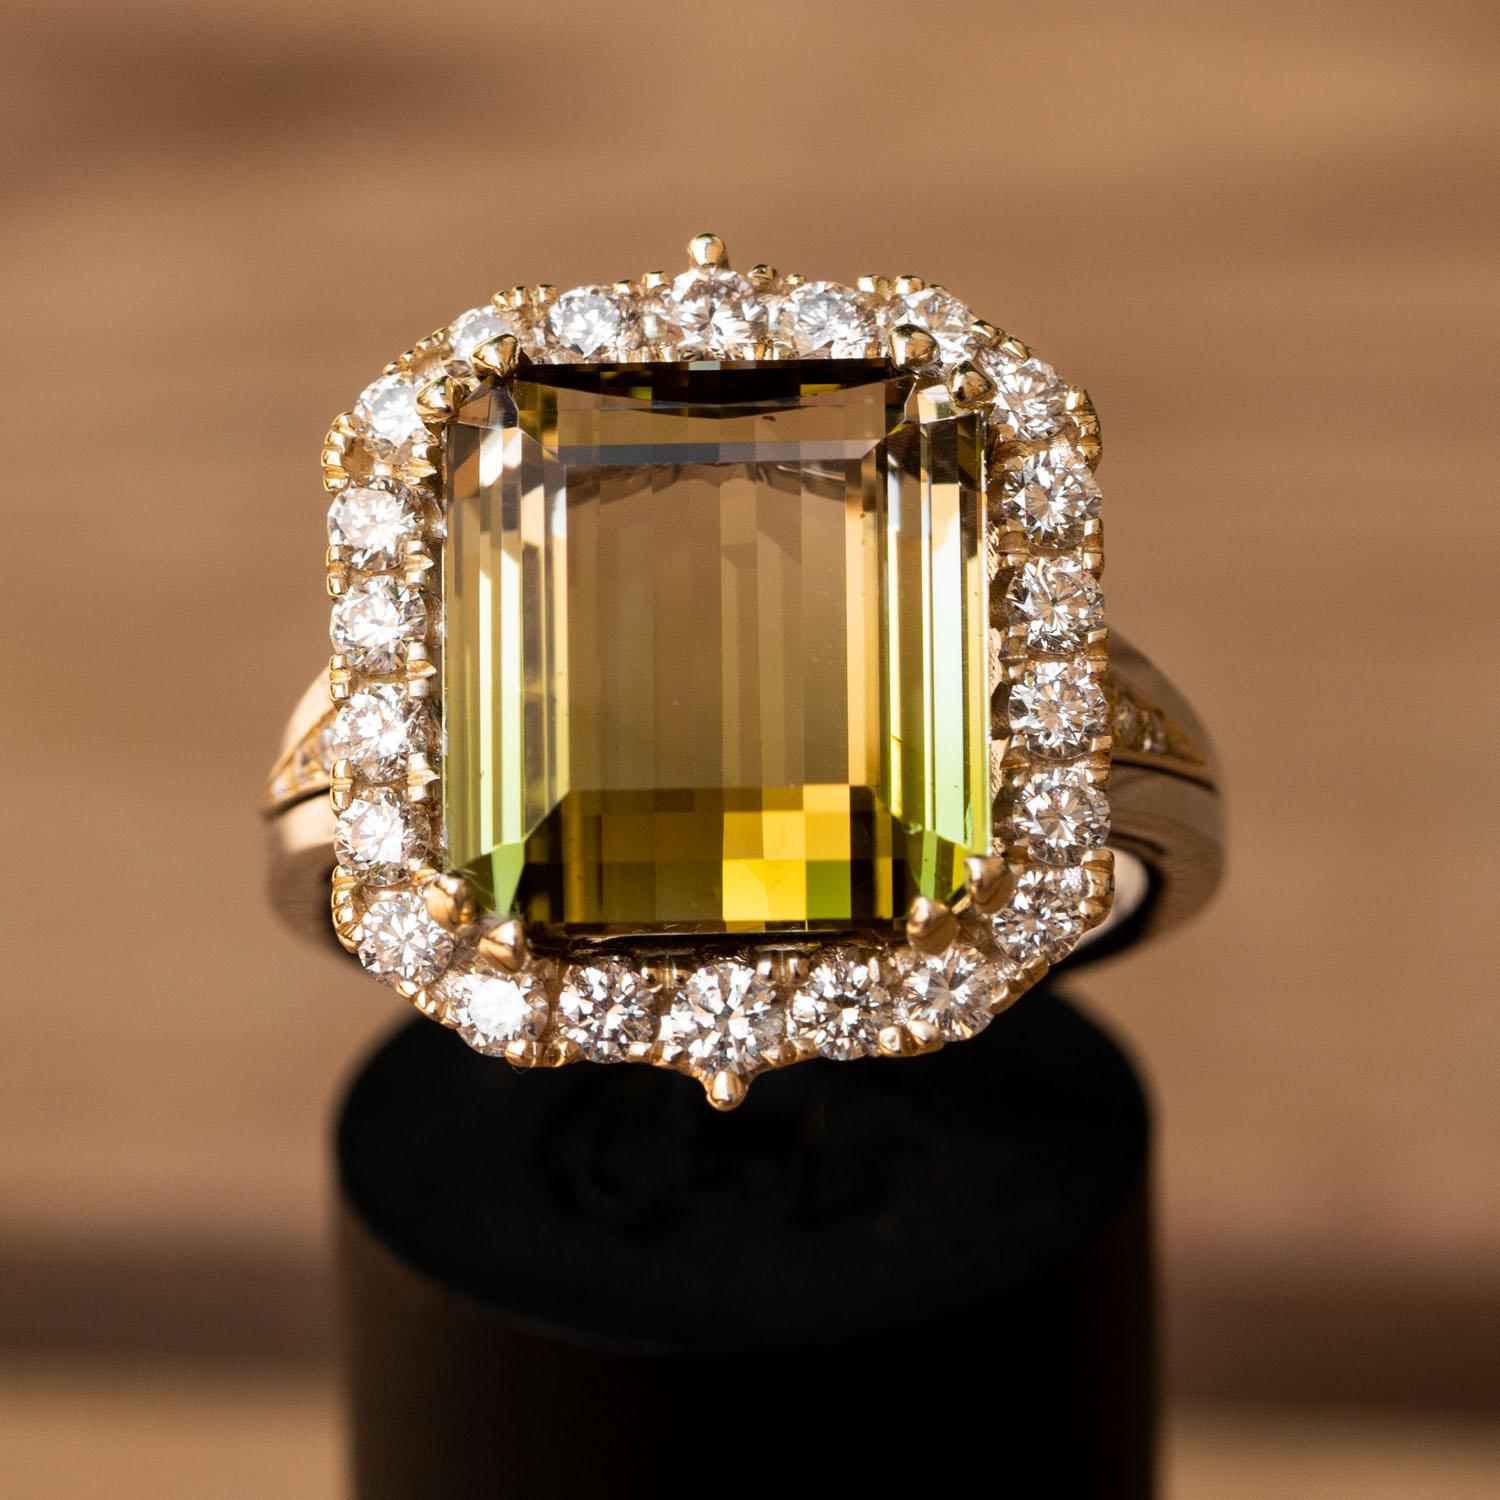 This emerald cut, natural bi color natural tourmaline diamond ring is simply stunning! The large 10.00 carat natural central tourmaline surrounded by 1.01 carat sparkling natural diamonds.

This genuine bi-color Tourmaline gemstone displays a medium